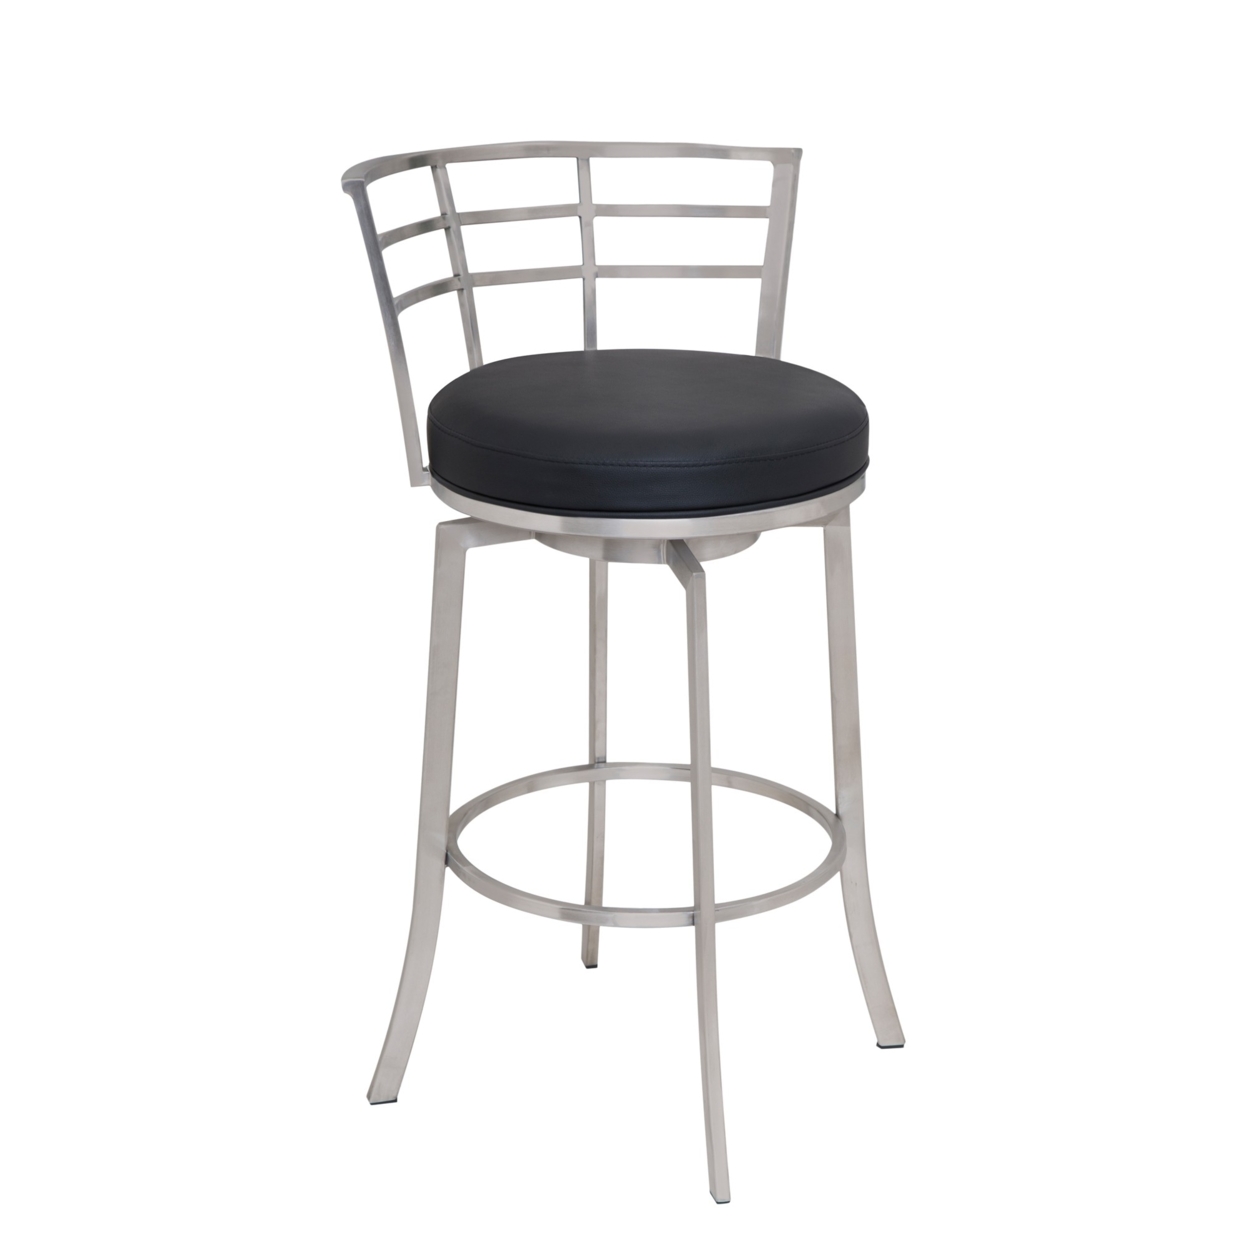 30 Inch Counter Height Barstool With Leatherette Seat, Silver And Black- Saltoro Sherpi